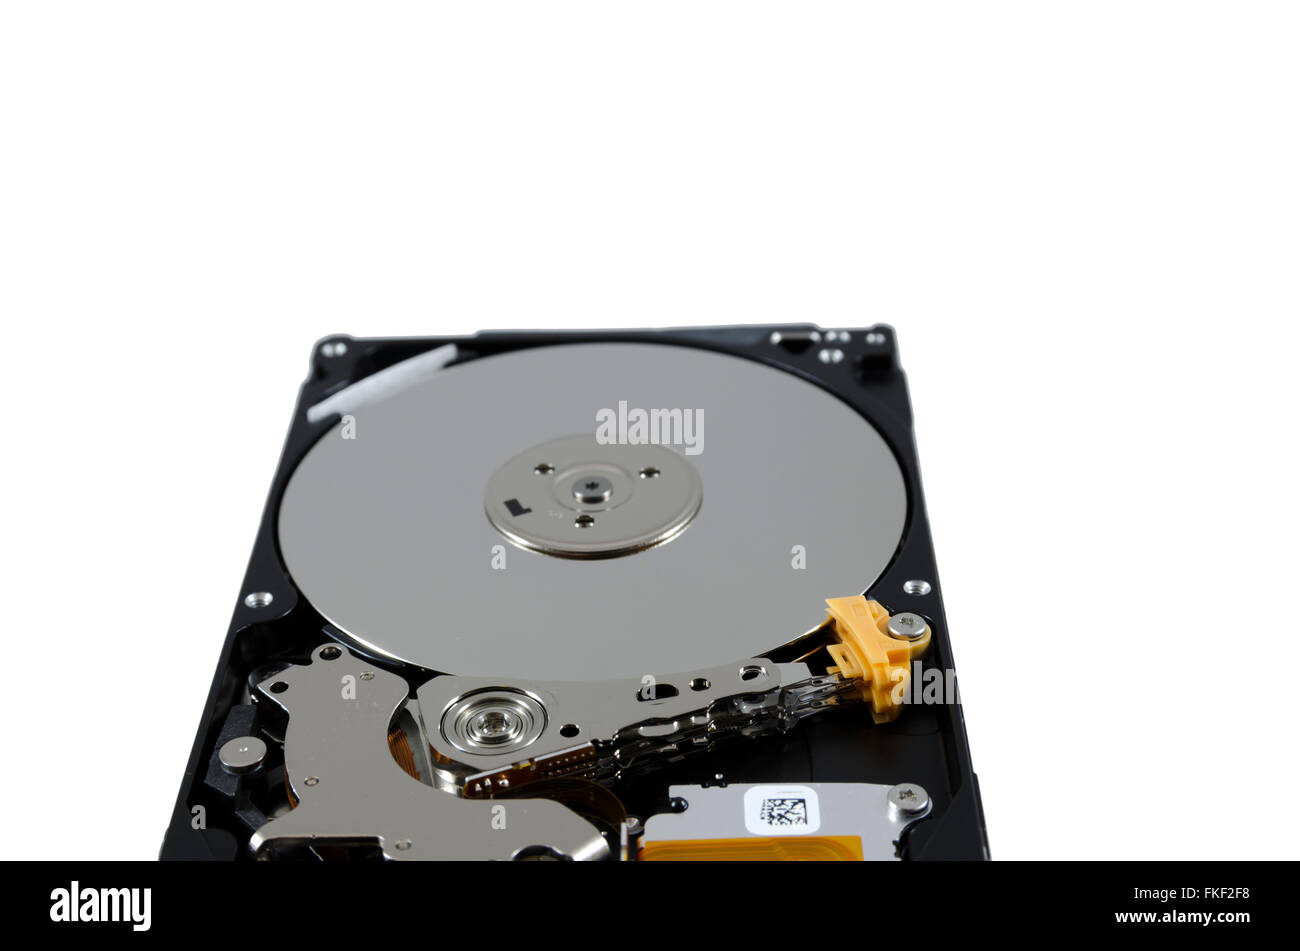 Page 3 - Hdd Internal High Resolution Stock Photography and Images - Alamy